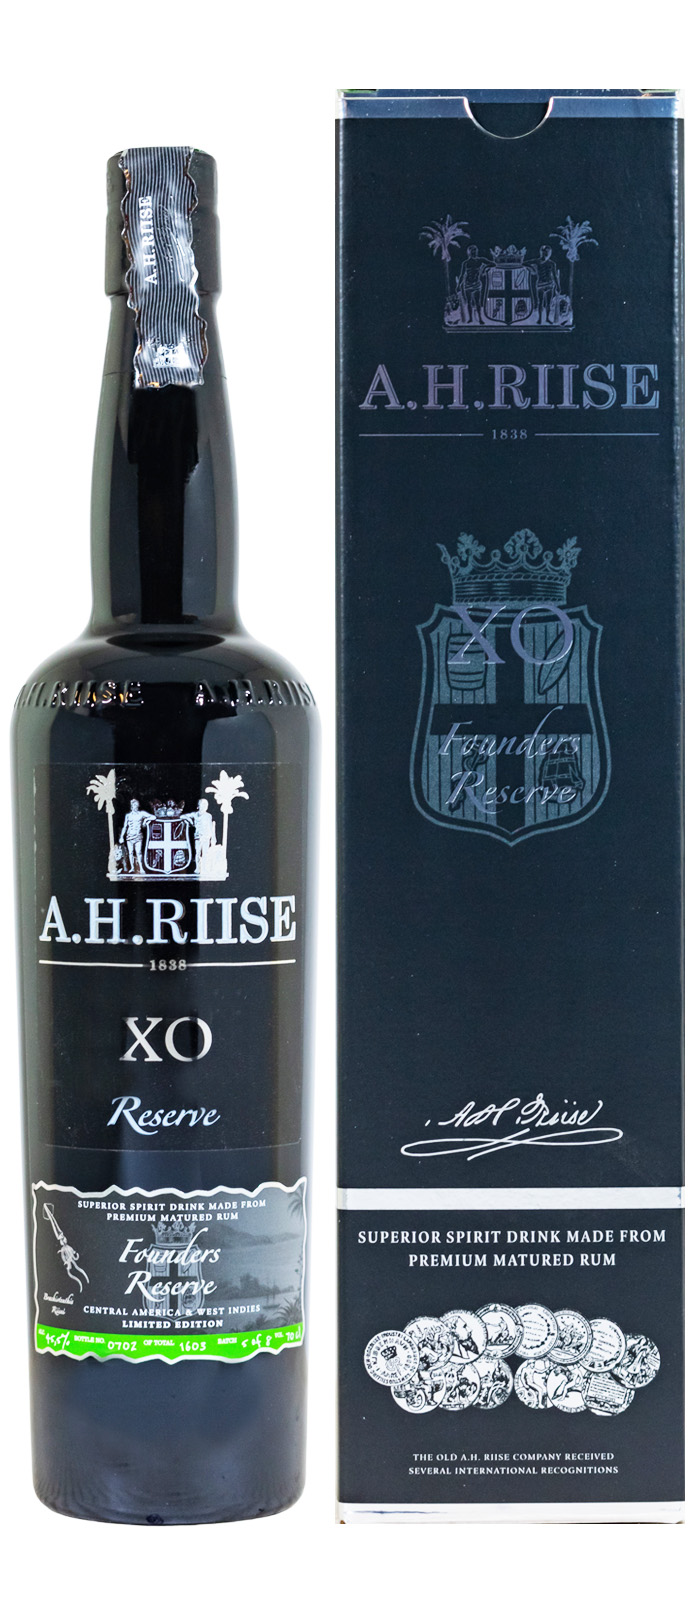 A.H. Riise XO Founders Reserve Collectors Edition 6 - 0,7L 45,5% vol